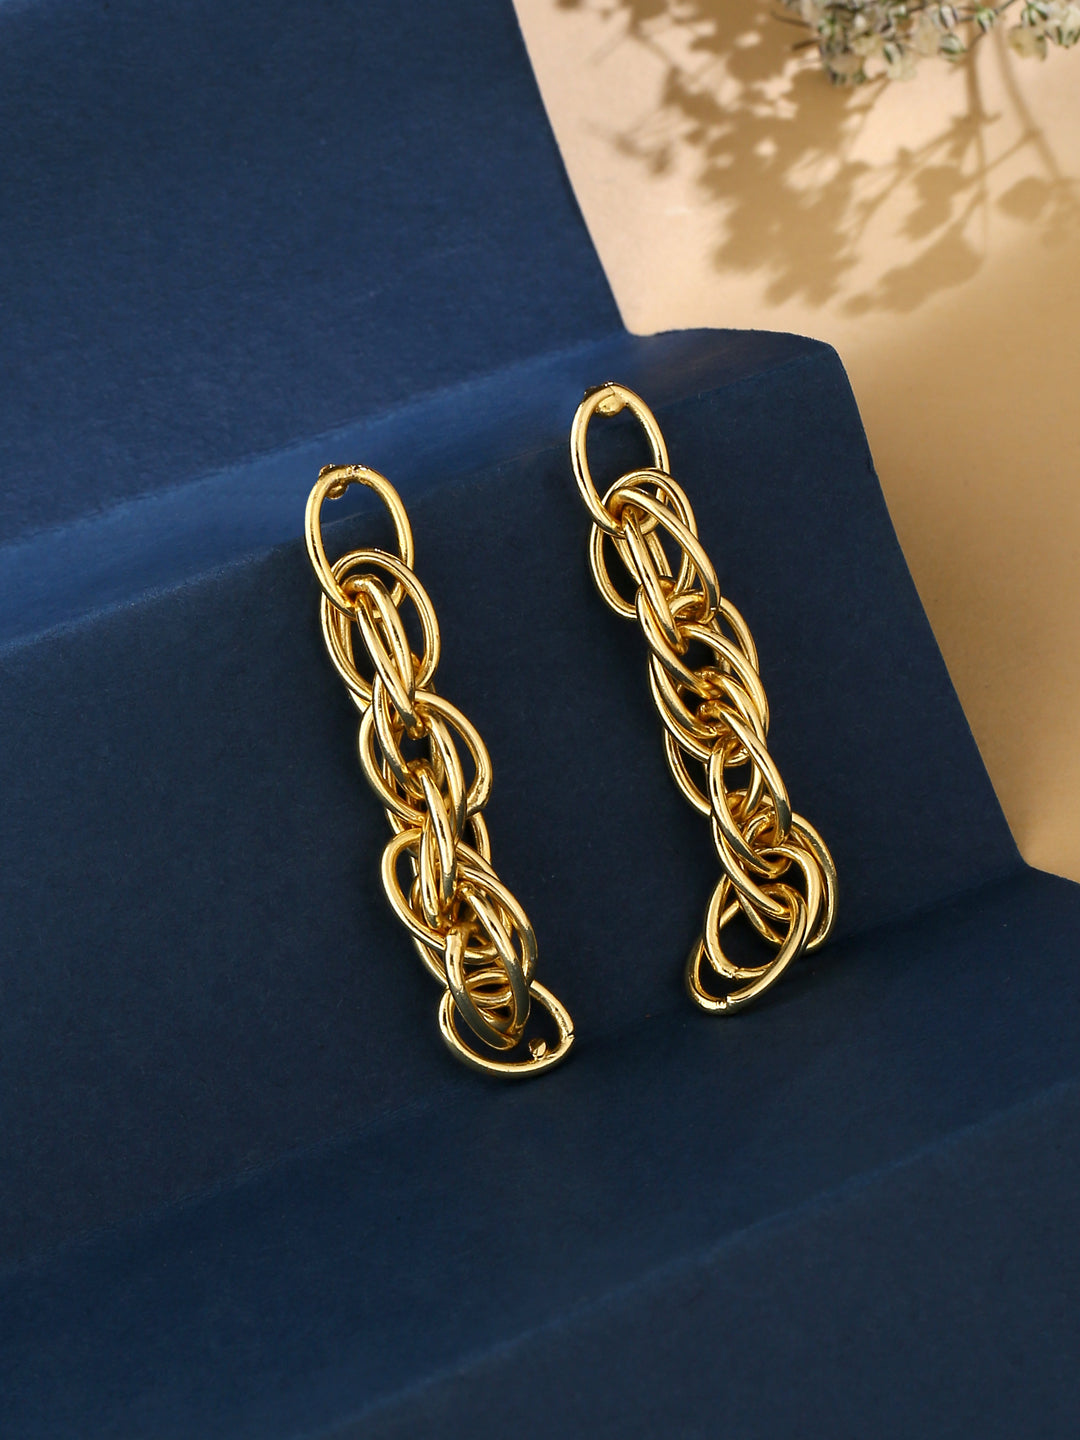 Buy Gold Plated Silver Earrings Online at Jayporecom